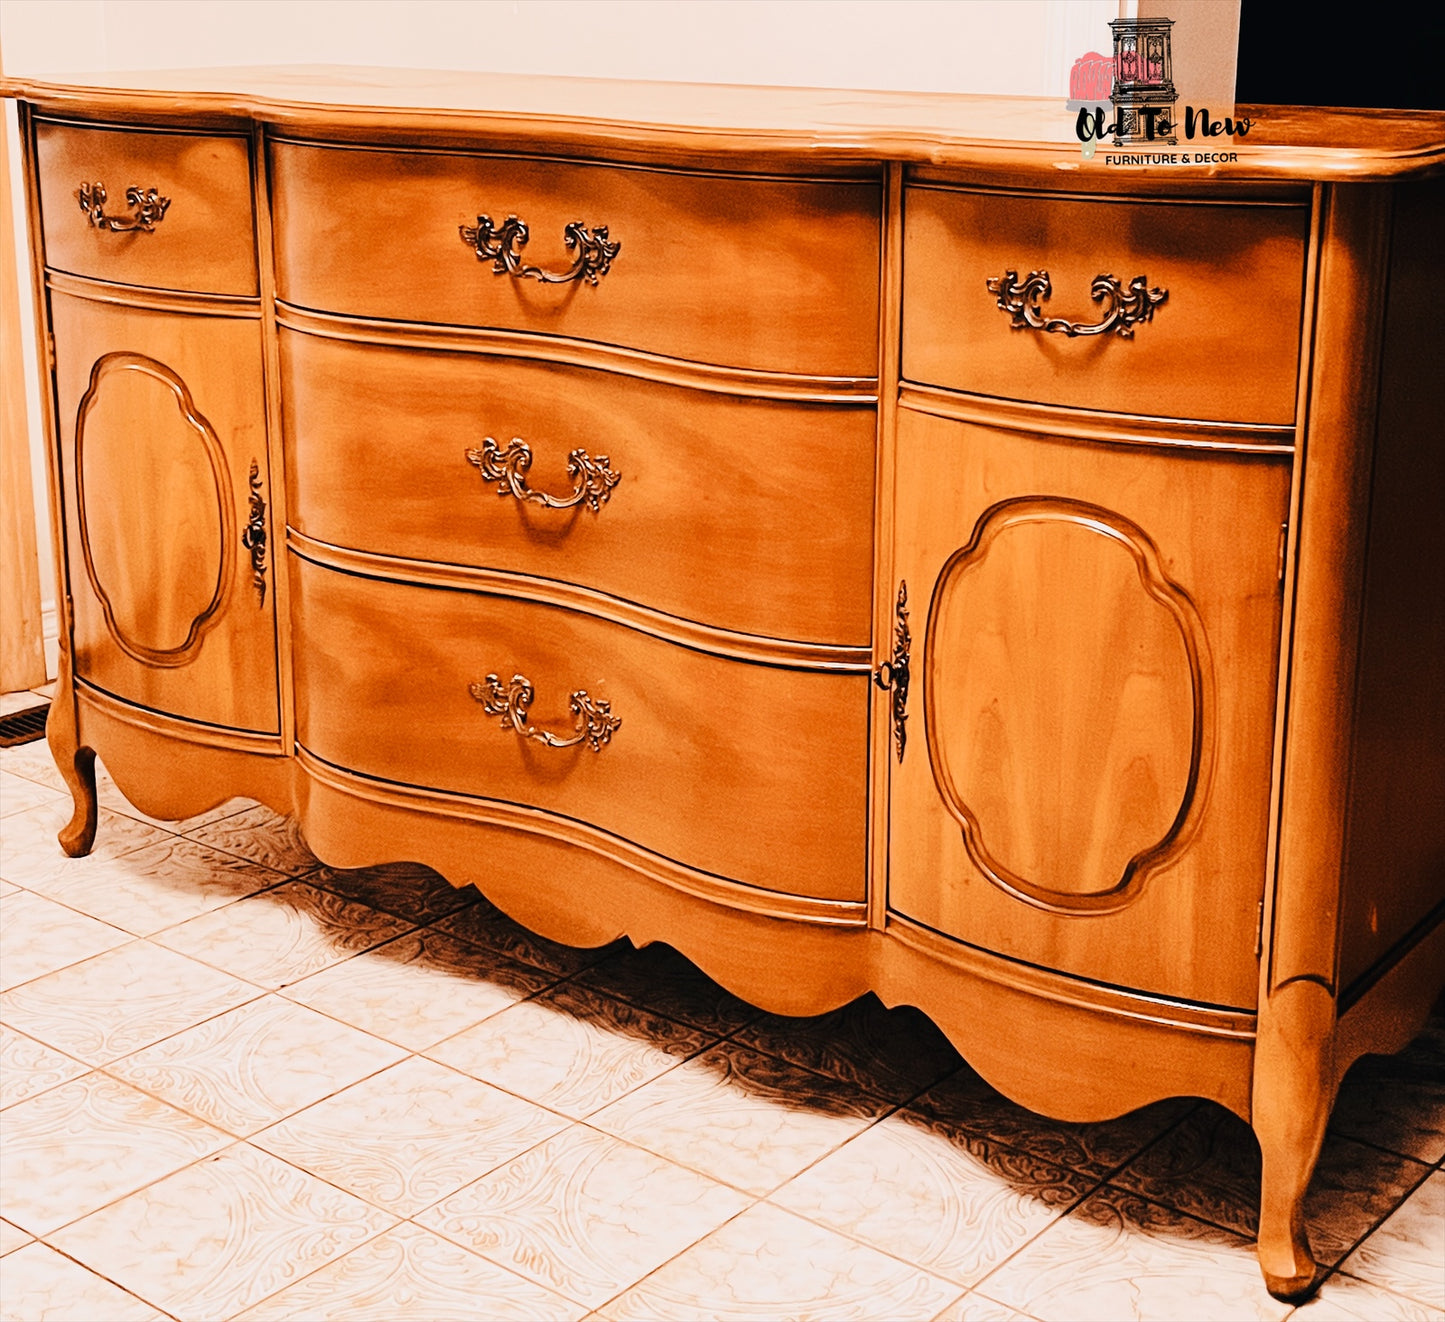 Stunning Large Sideboard Available, French Provincial Style; Choose A Paint Color and Customize This Sideboard